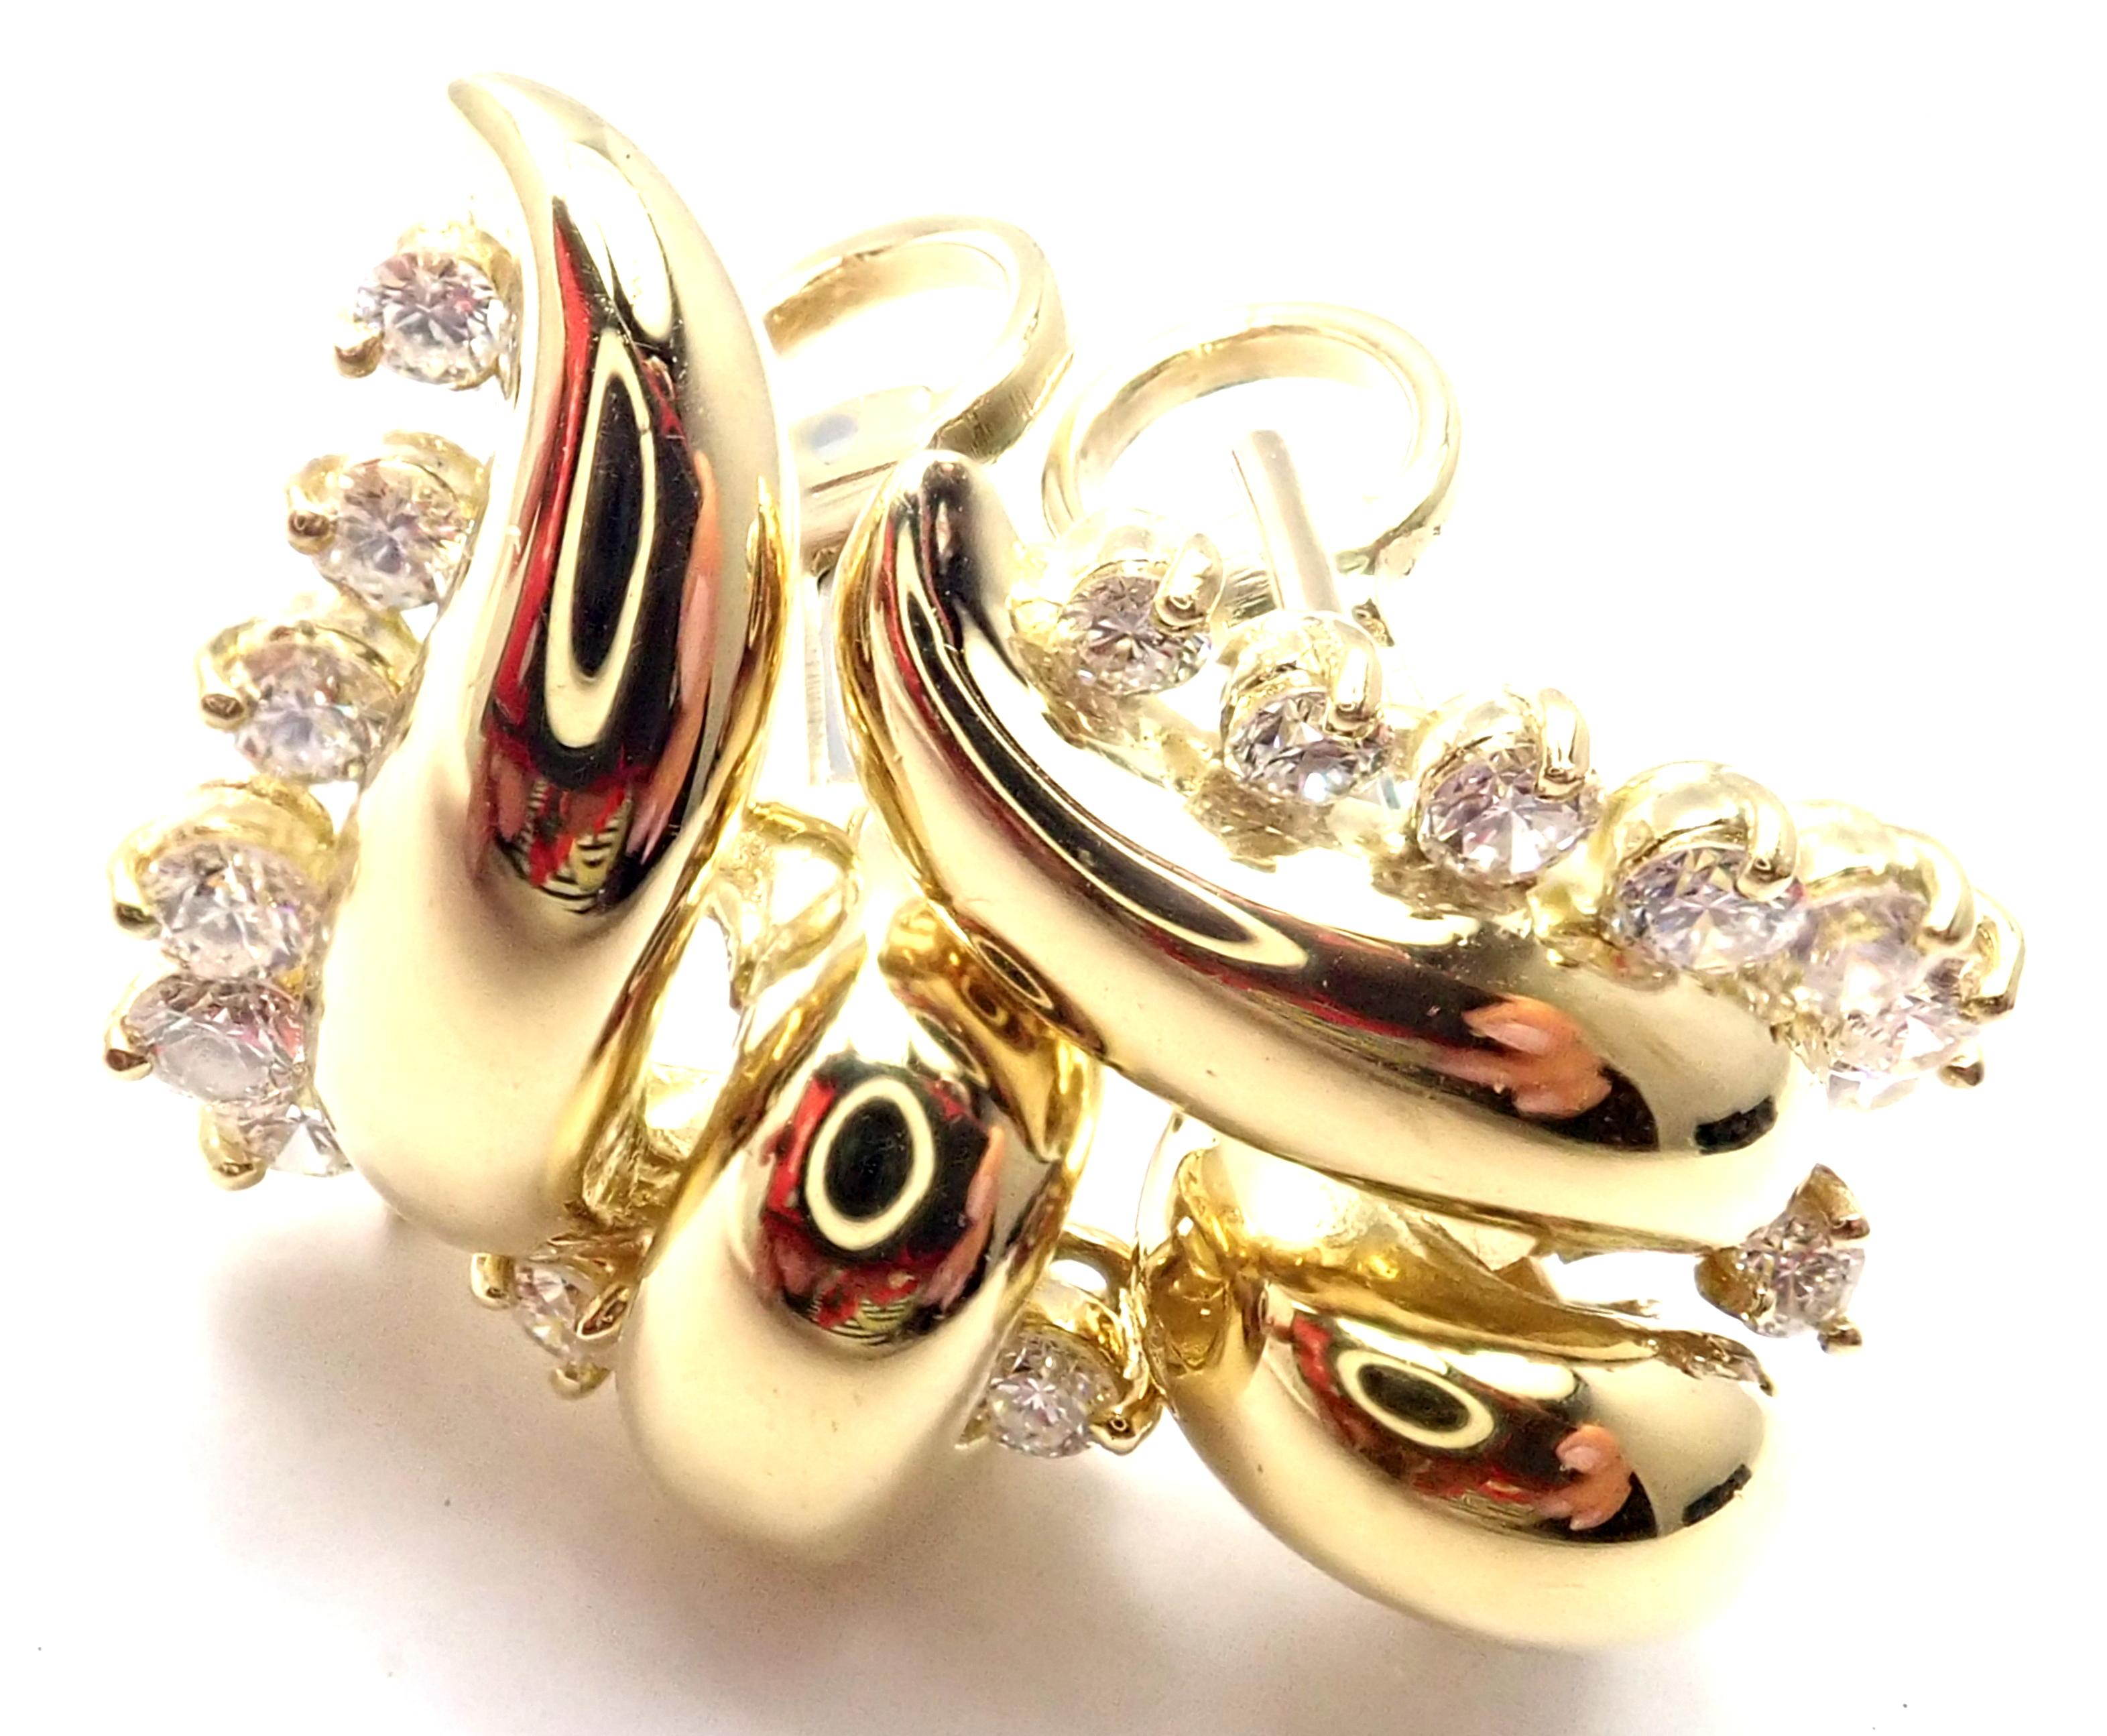 Tiffany & Co. Diamond Yellow Gold Swirl Earrings In Excellent Condition For Sale In Holland, PA